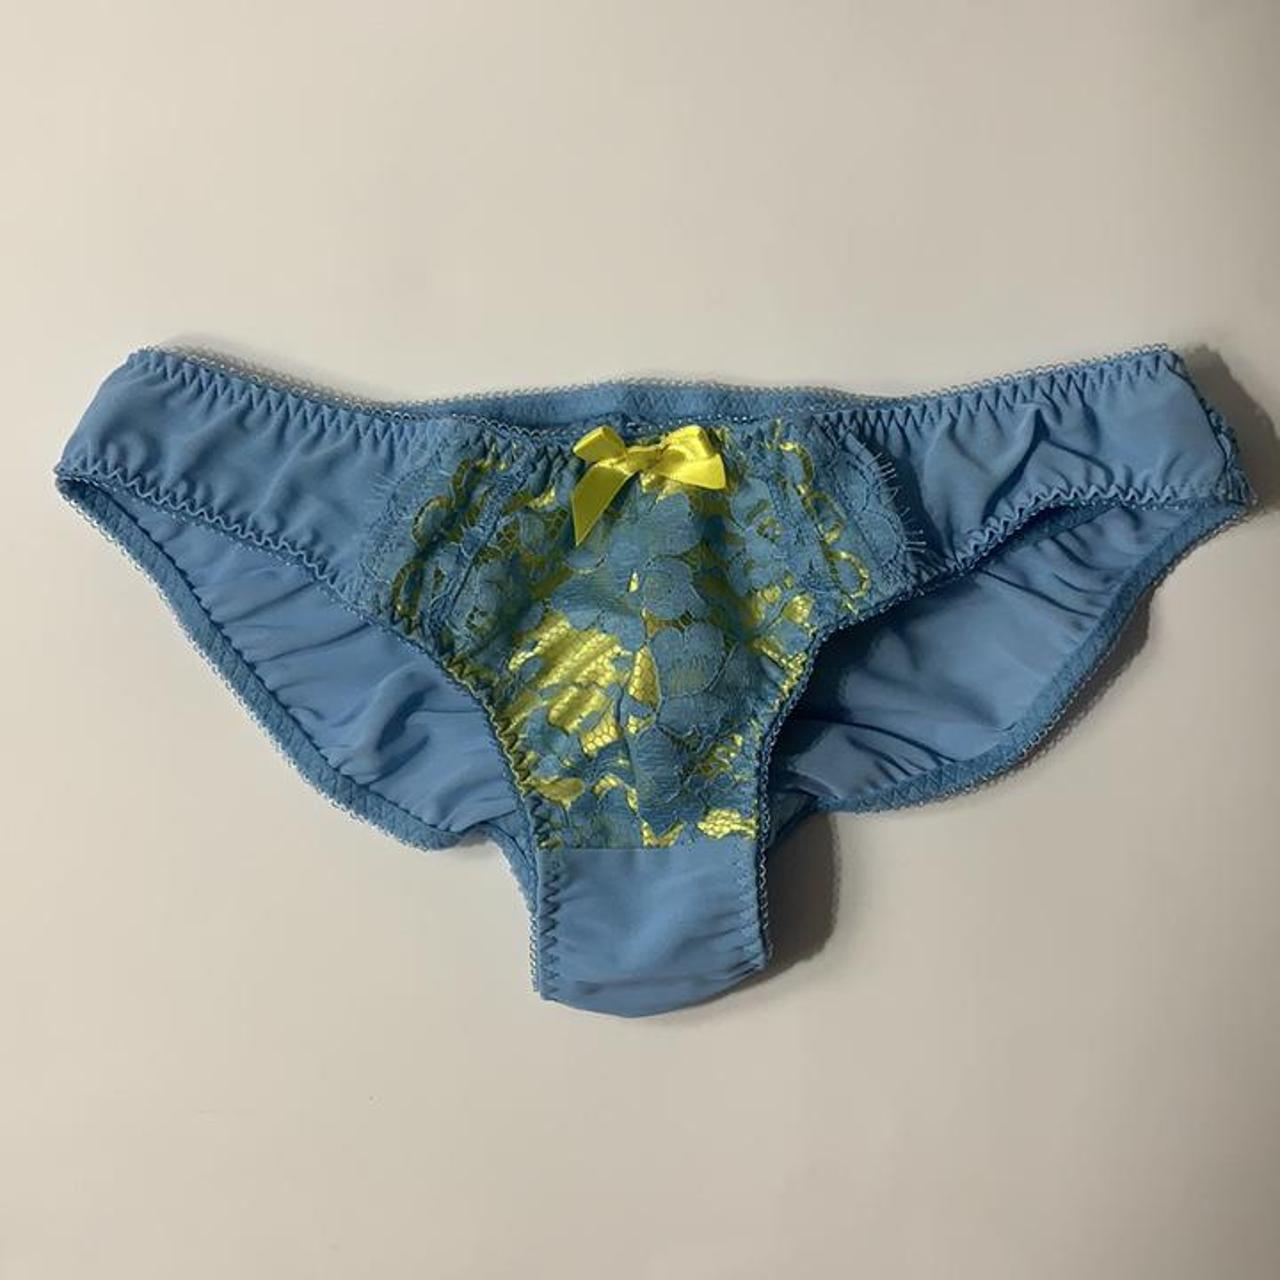 Product Image 1 - NWT Agent Provocateur Selena Brief
Brand